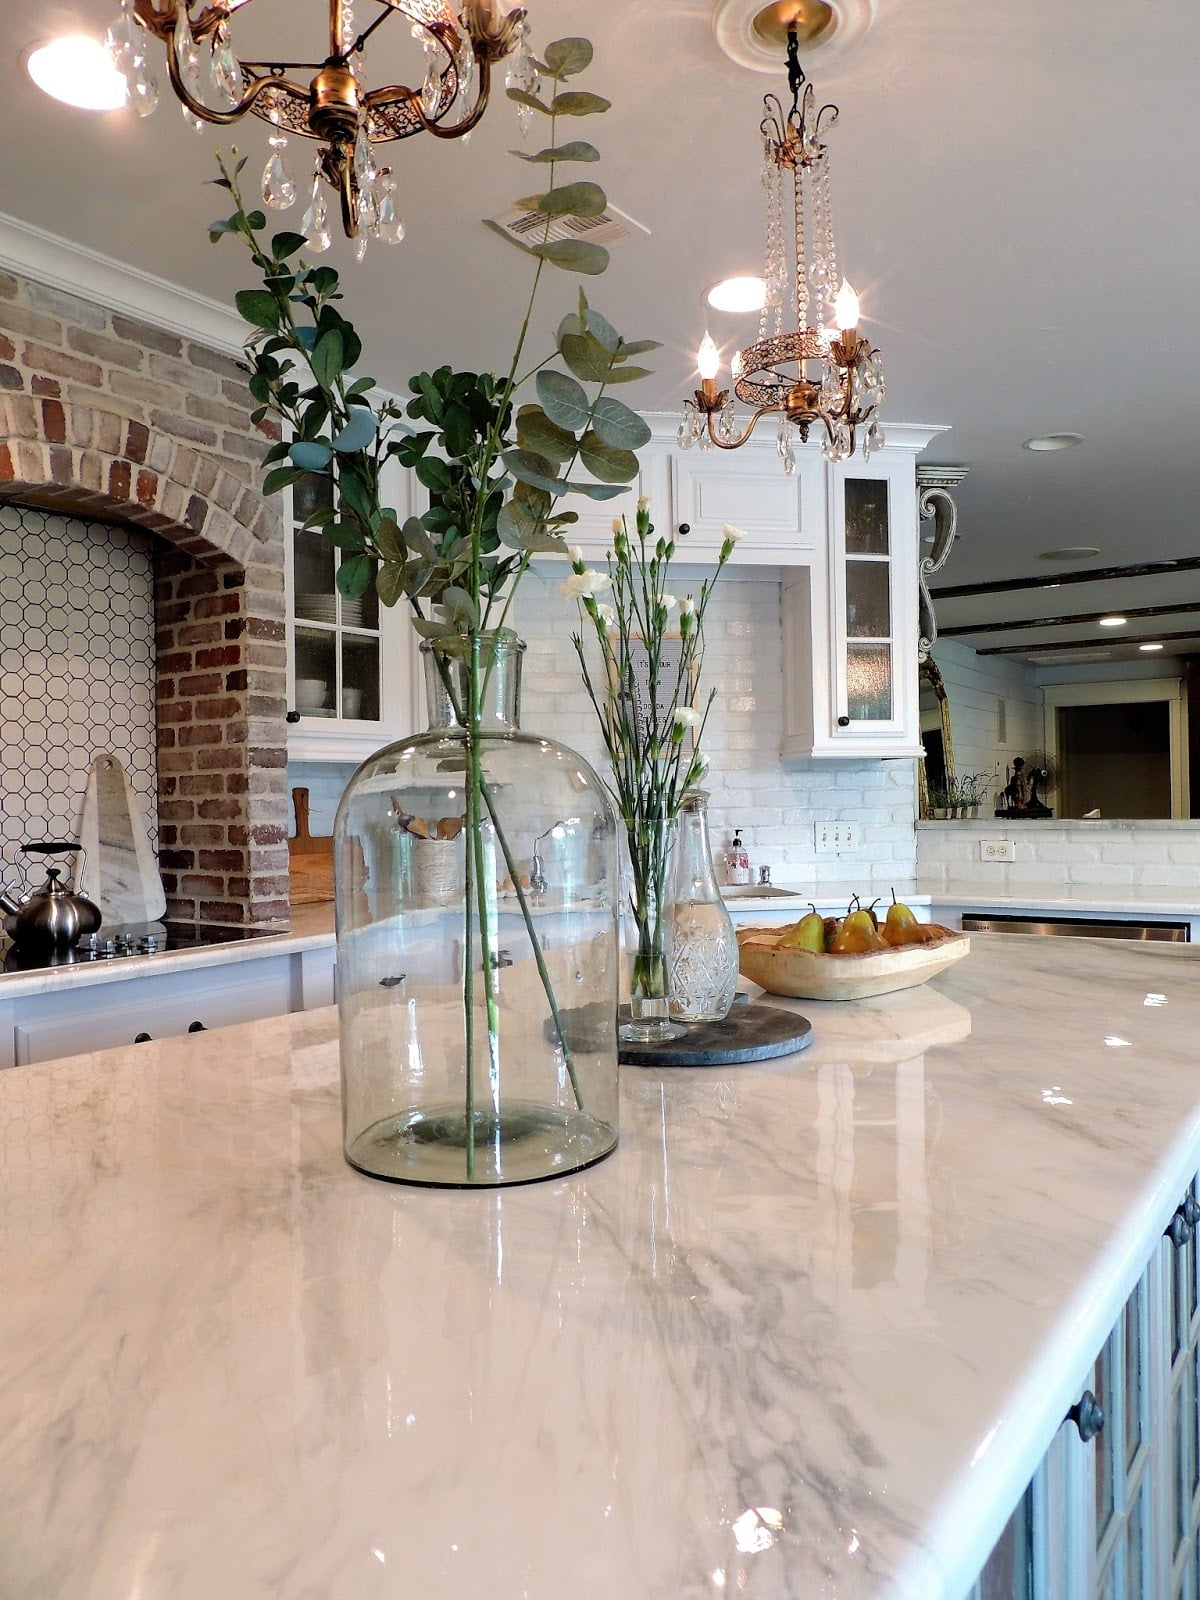 9 Breathtaking DIY Counter tops That'll Blow Your Mind